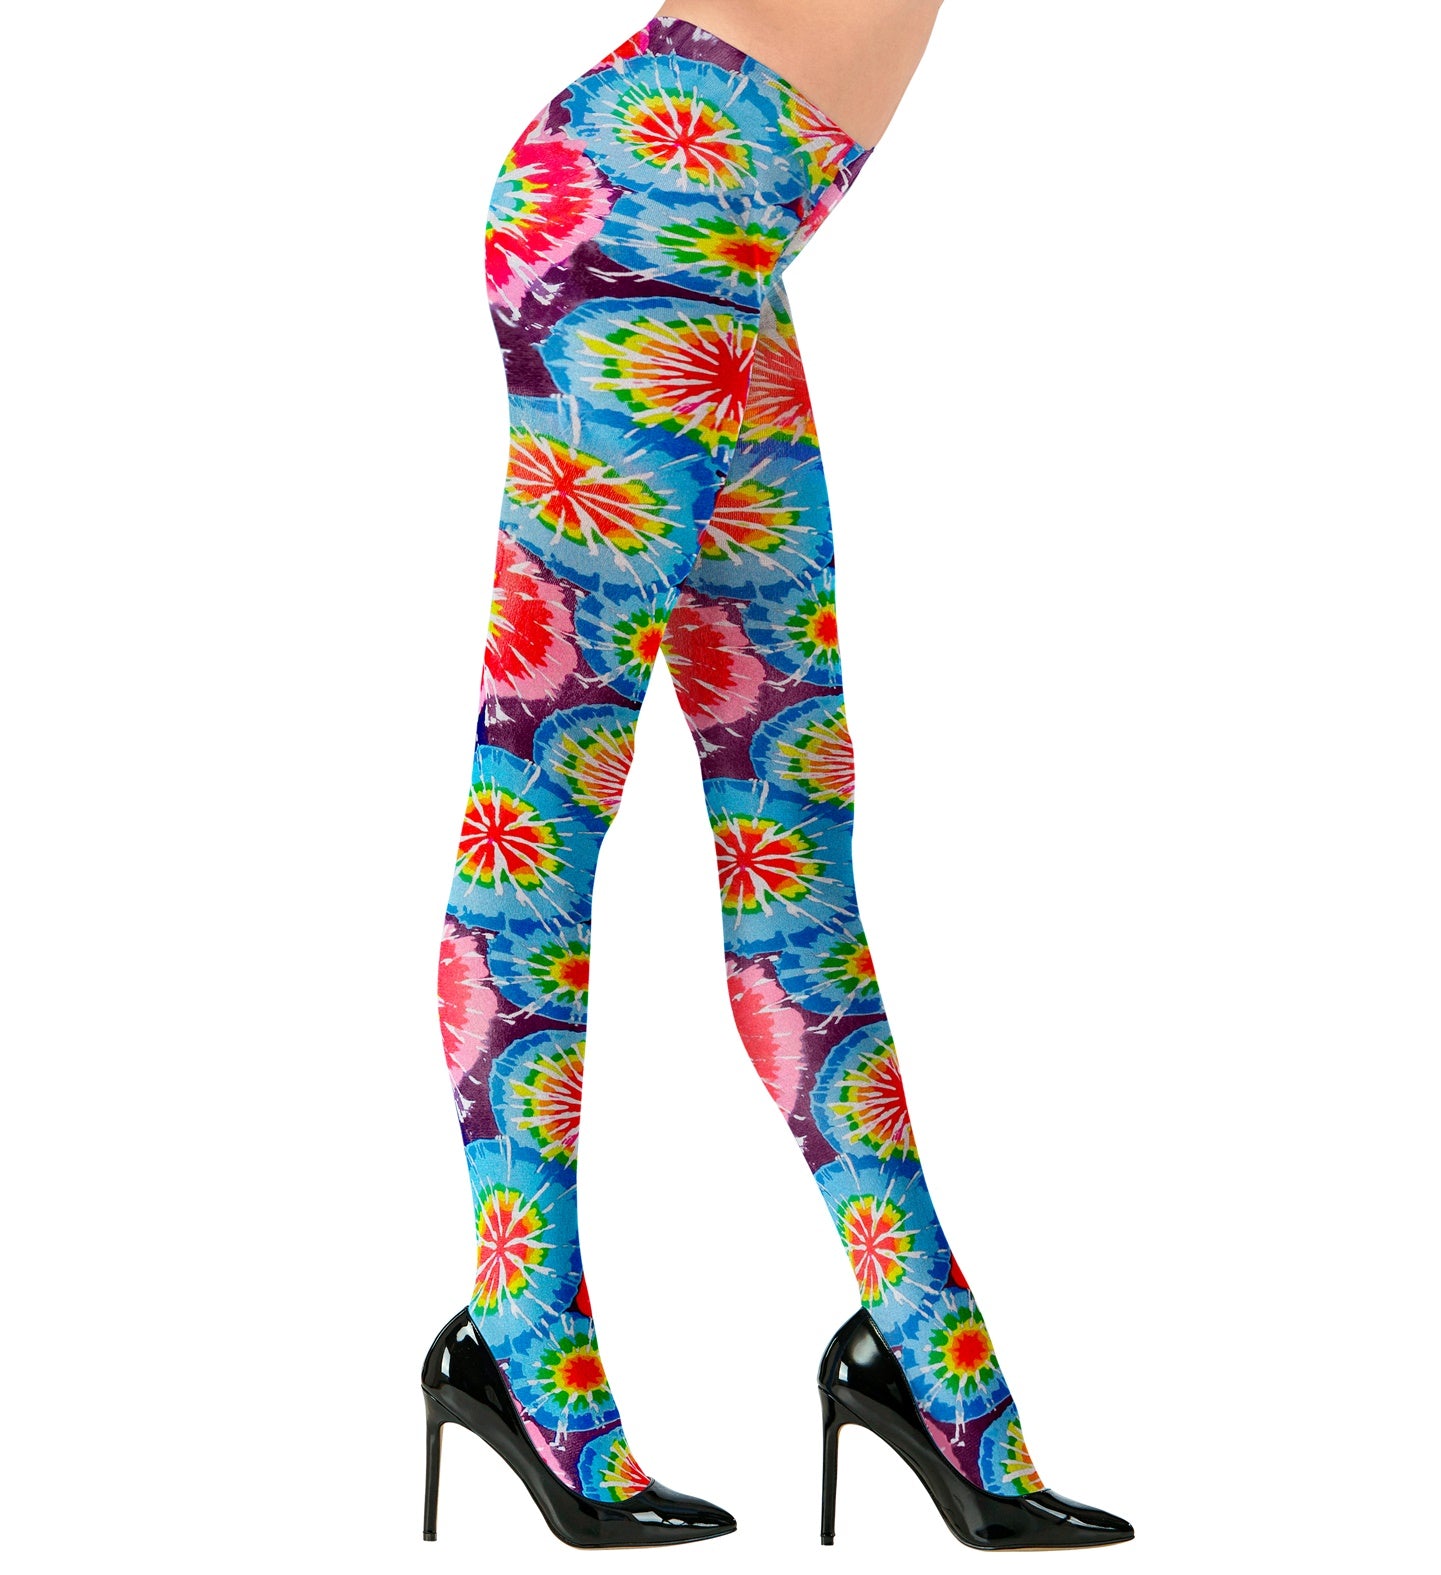 Neon Psychedelic Tights